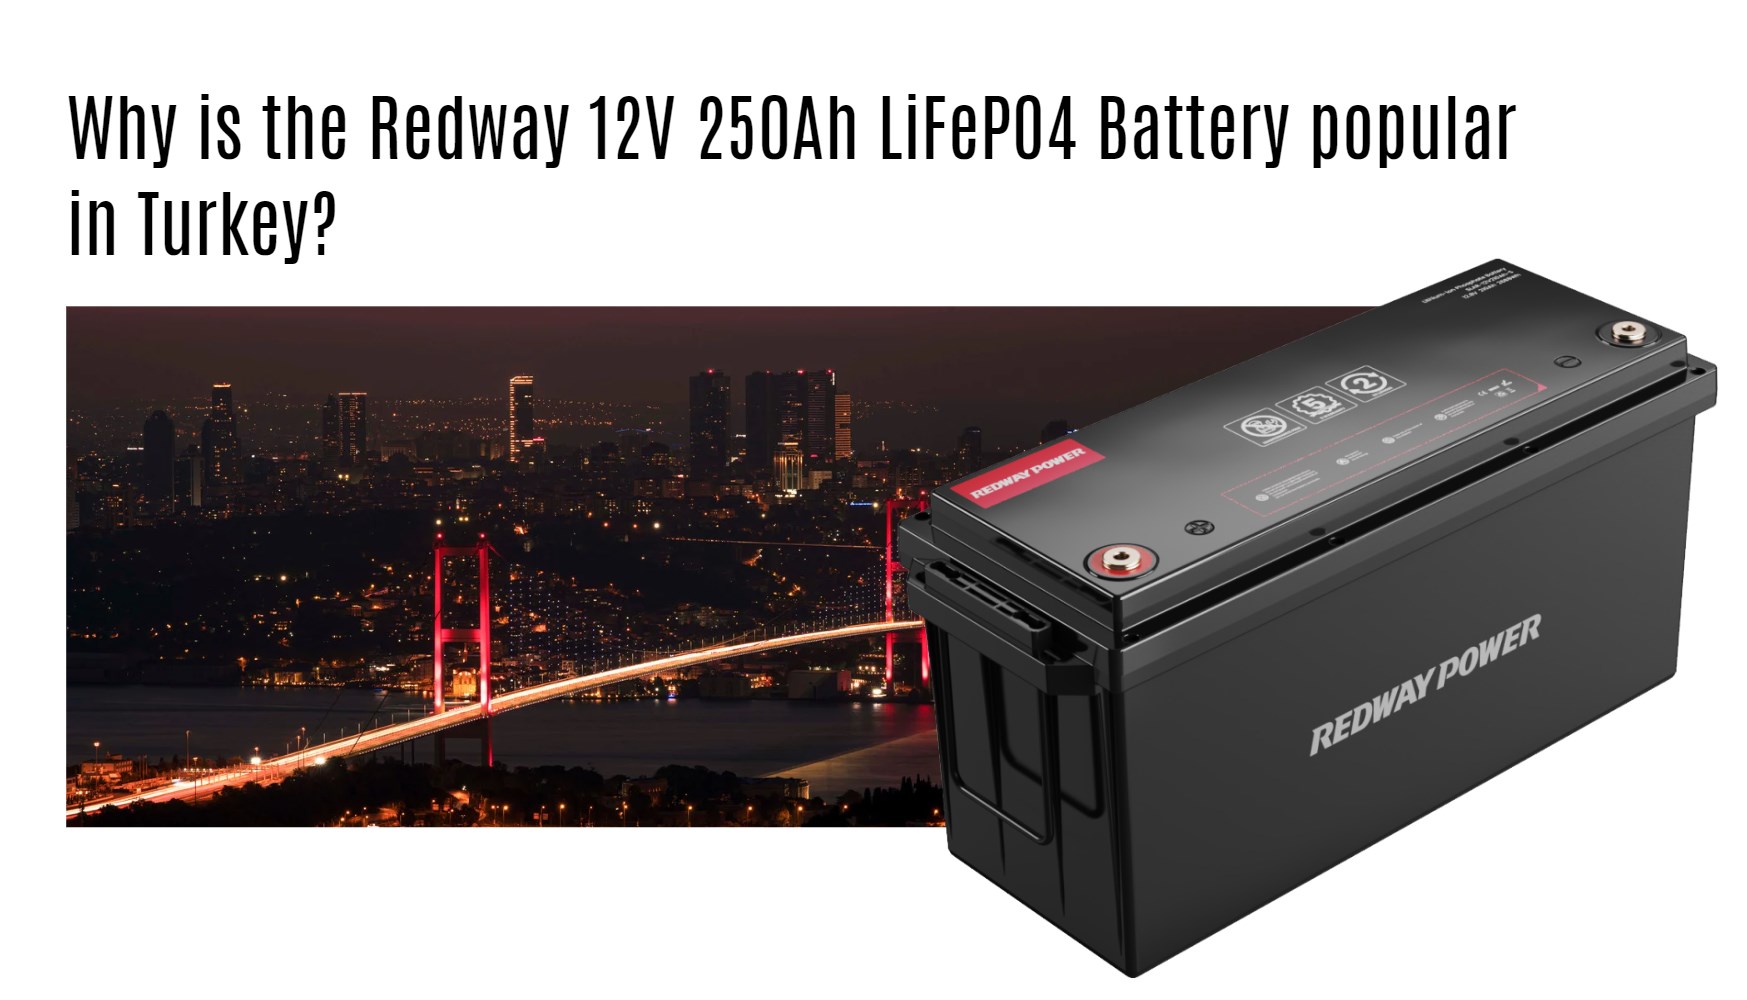 Why is the Redway 12V 250Ah LiFePO4 Battery popular in Turkey?